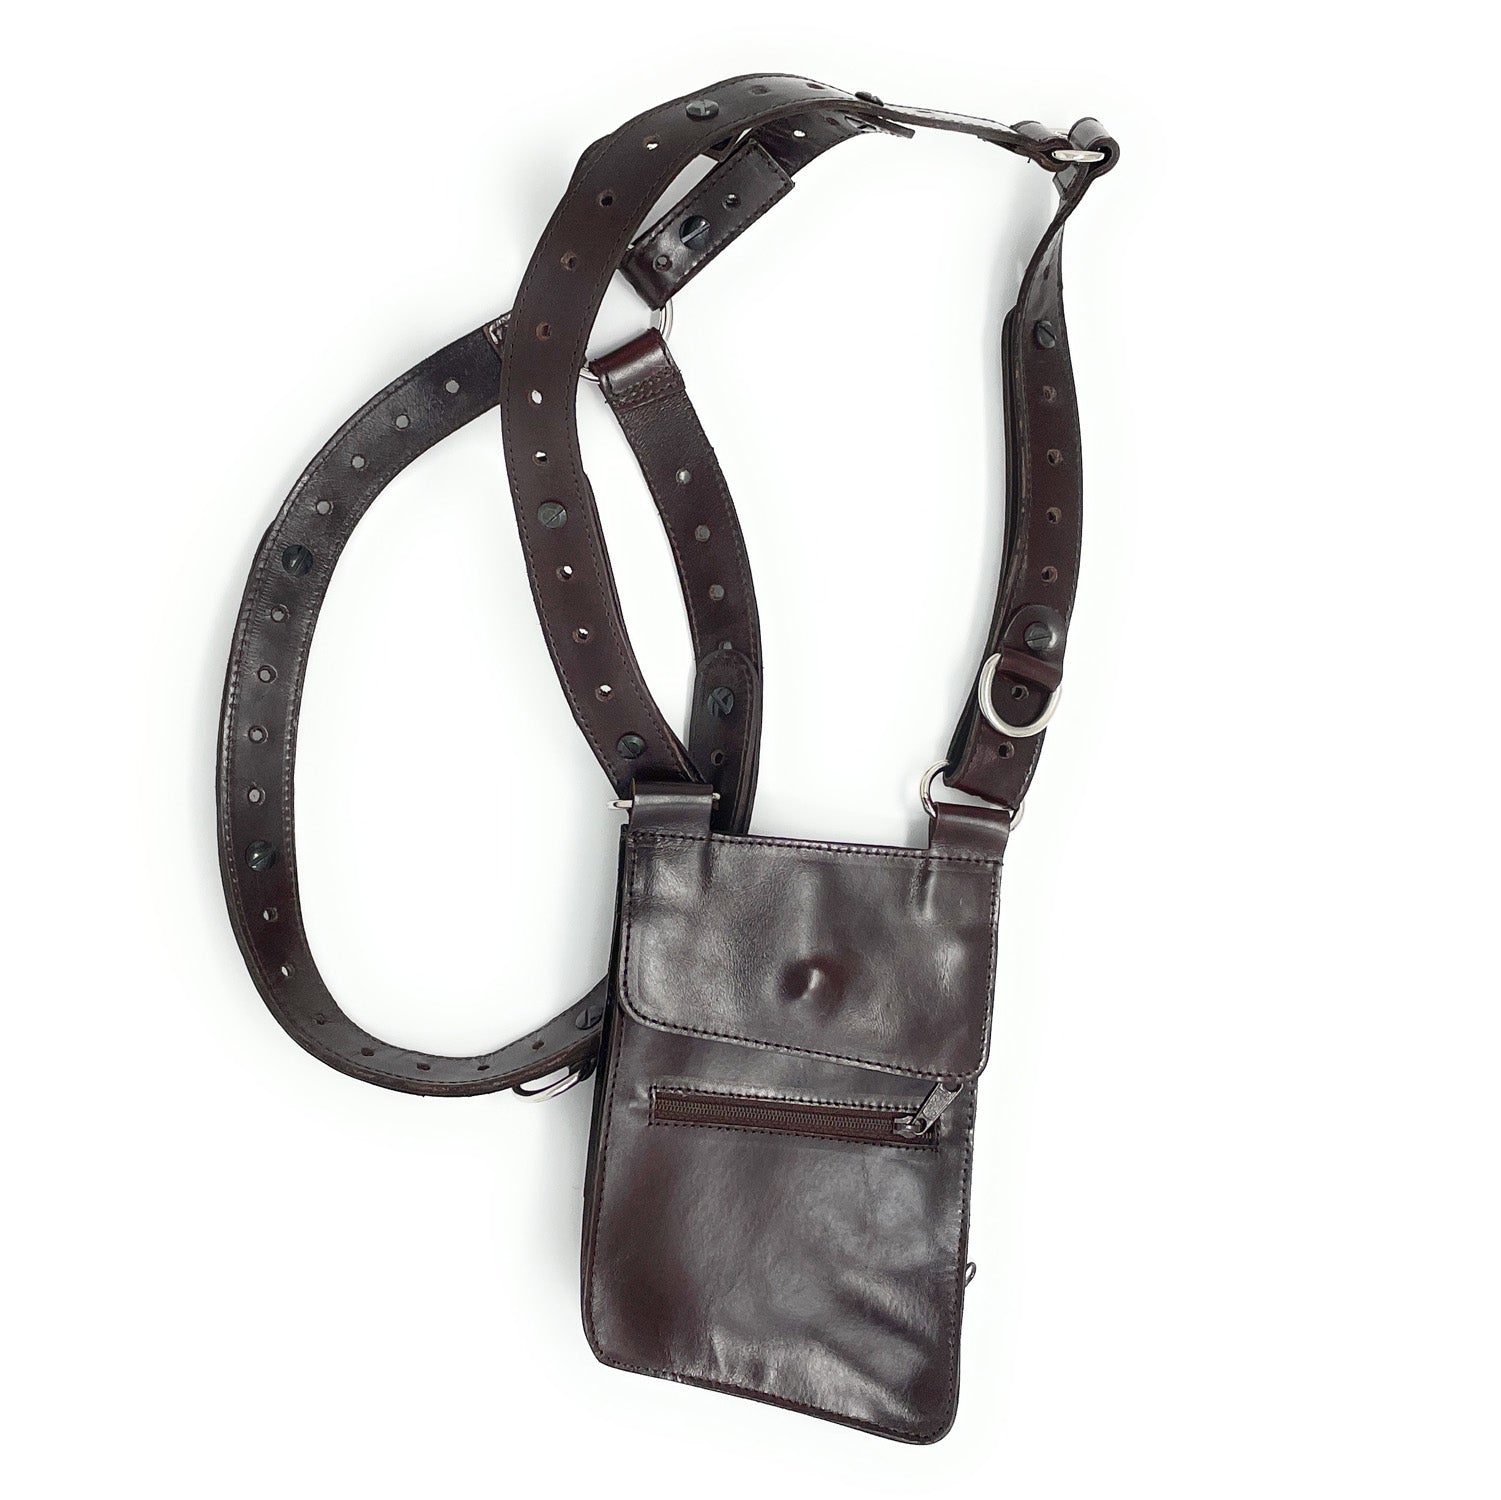 NEW) Genderfree Modular + Adjustable Utility Holster Harness with Bag v2  (Single or Dual)